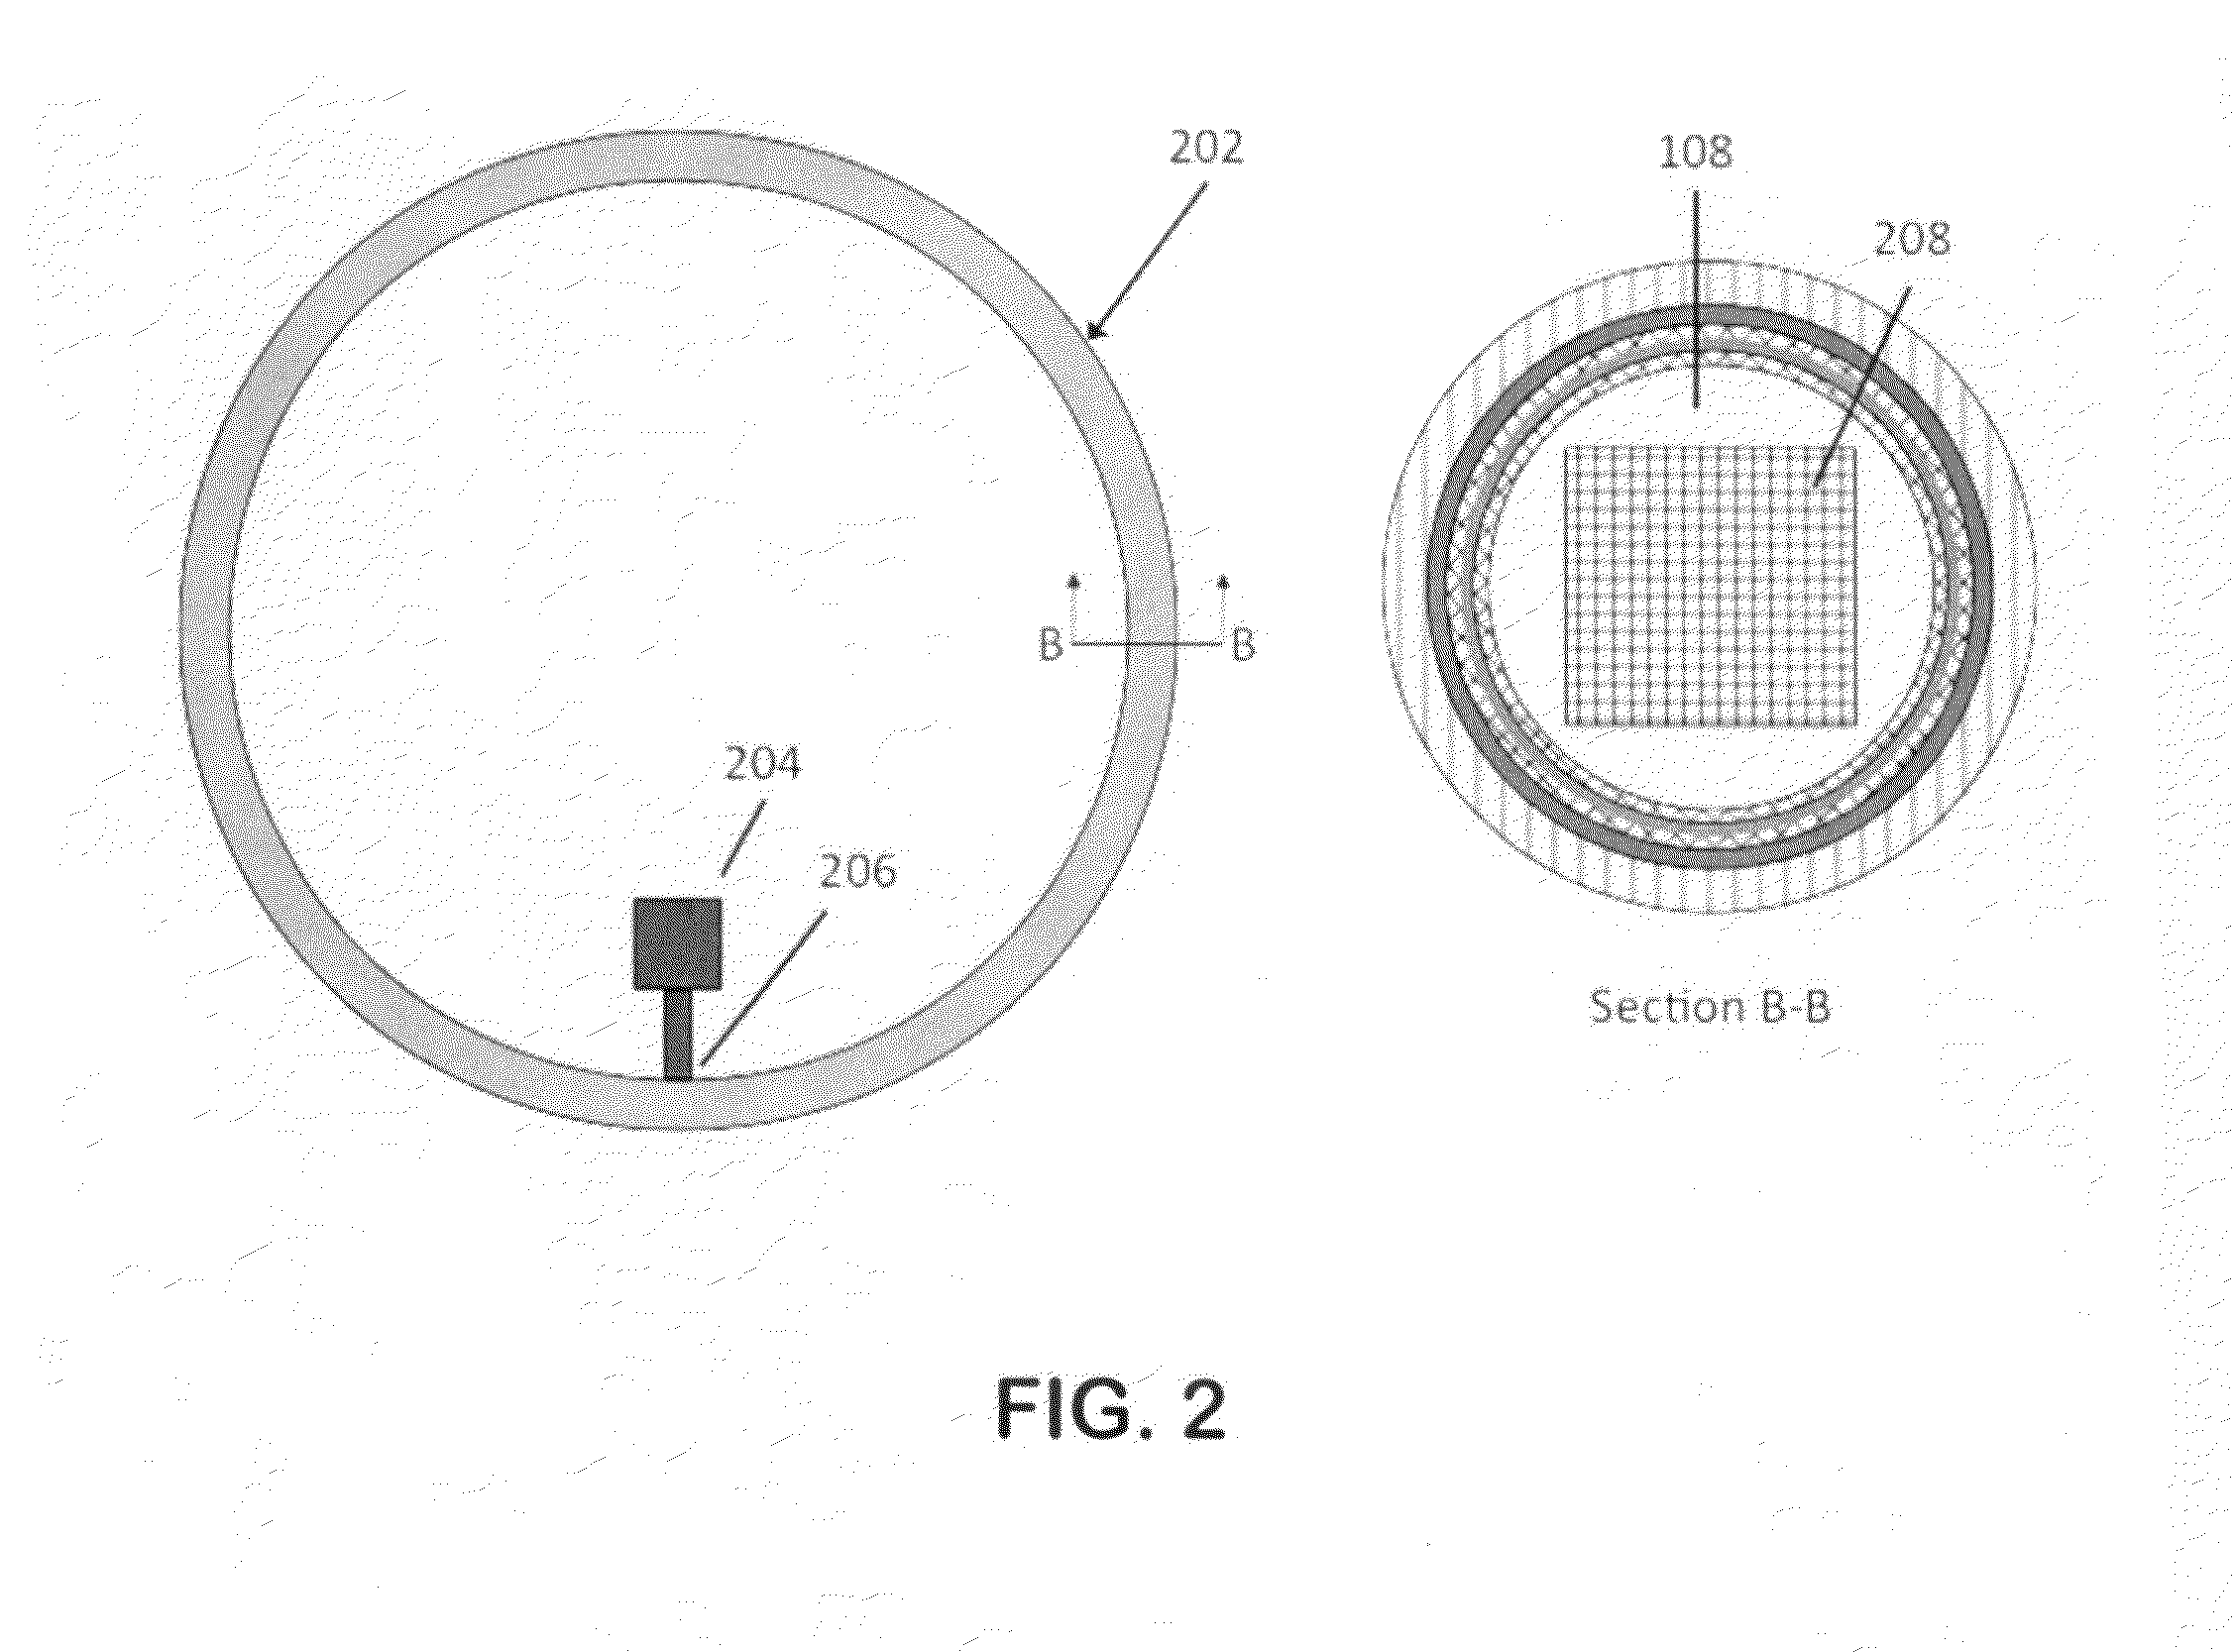 Method of both cooling and maintaining the uniform temperature of an extended object